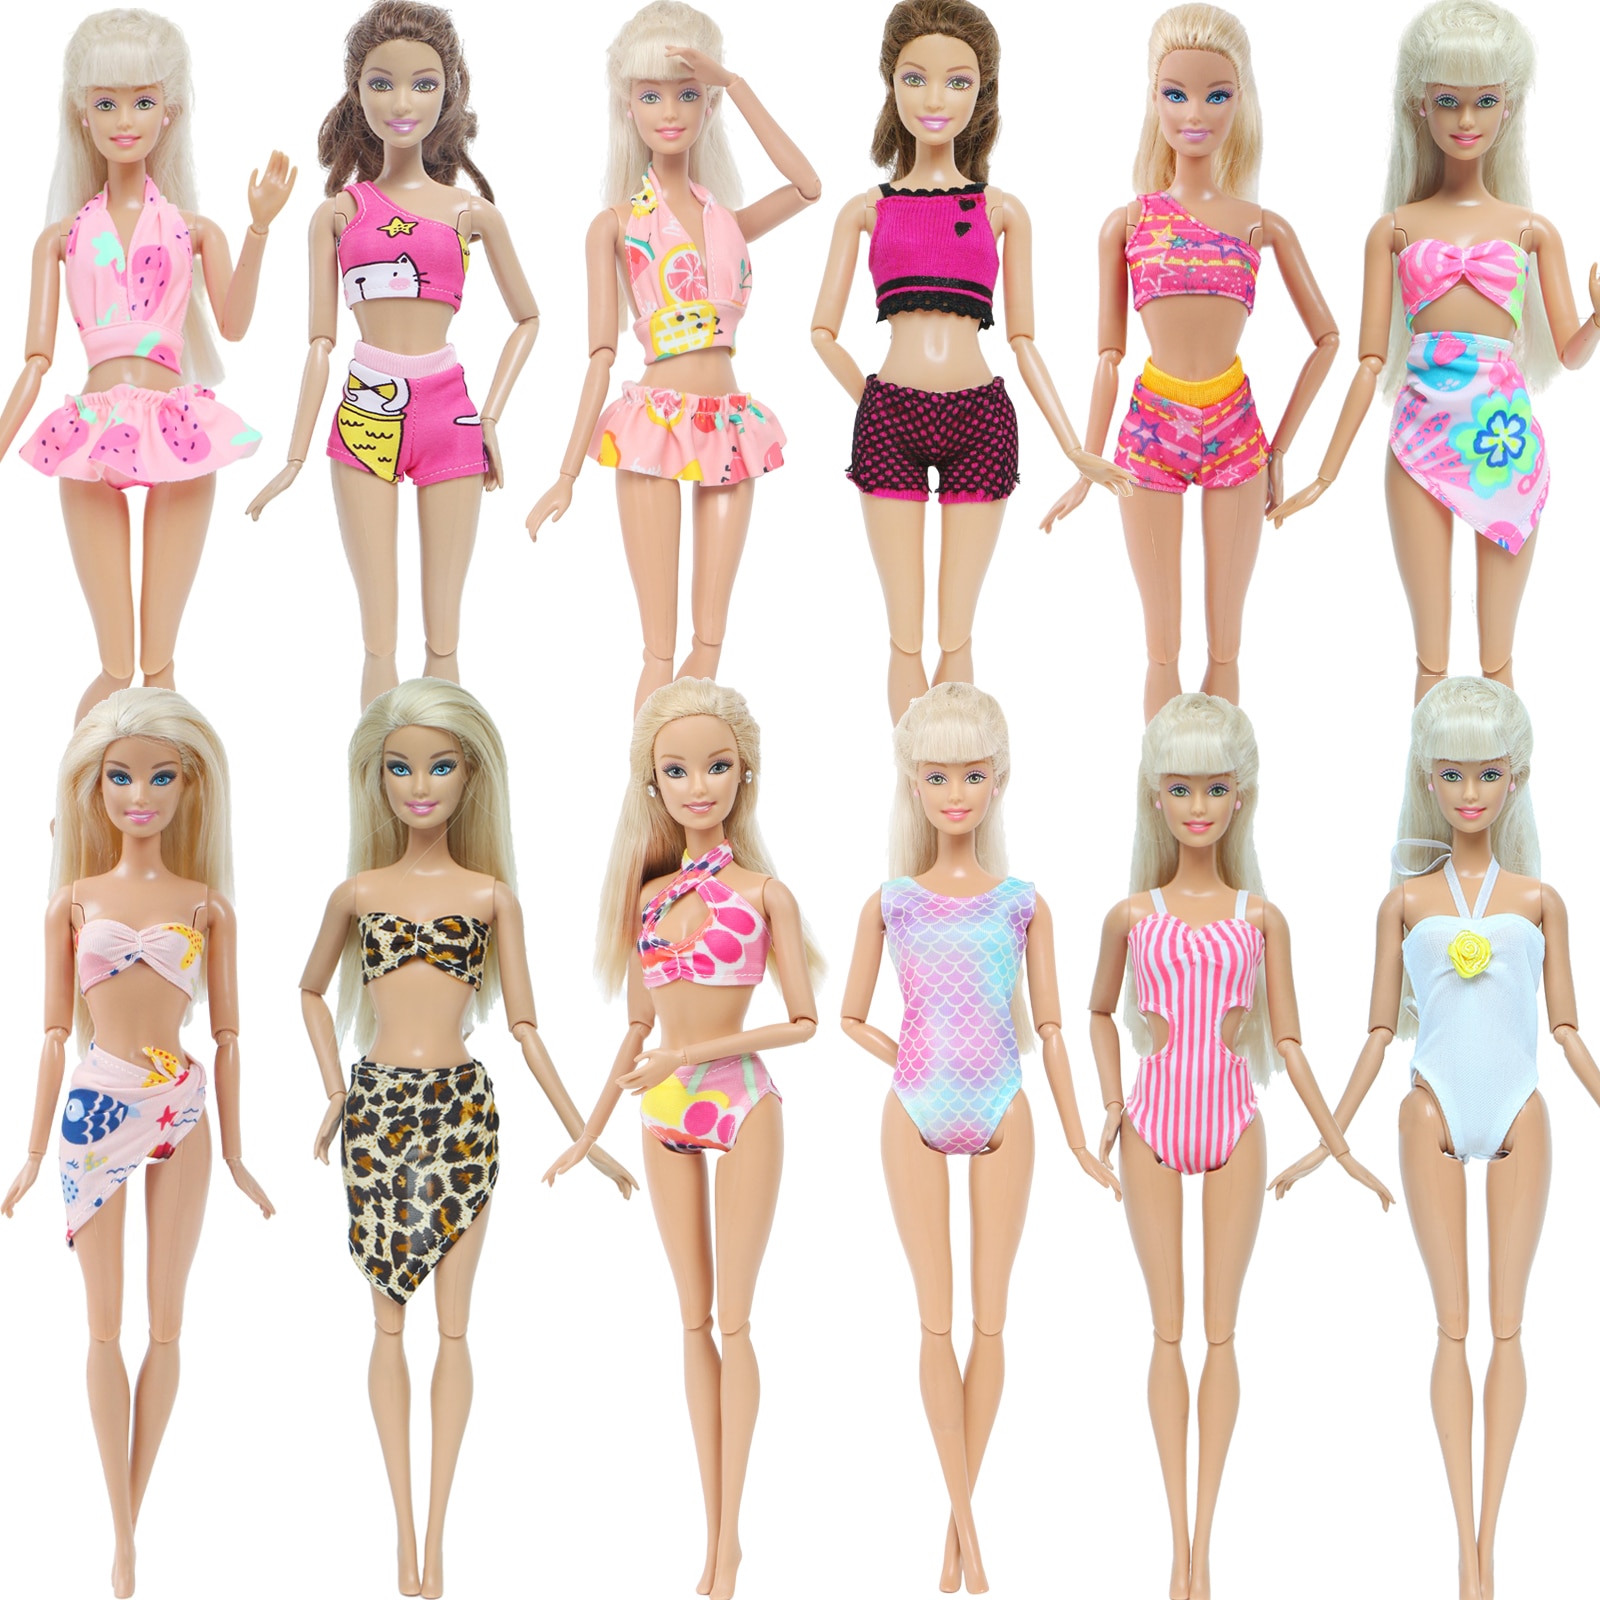 Barbie Doll Accessories - Chair, Lifebuoy, Swimsuits and Bikinis for Beach and Pool Play in Barbie Dollhouse.